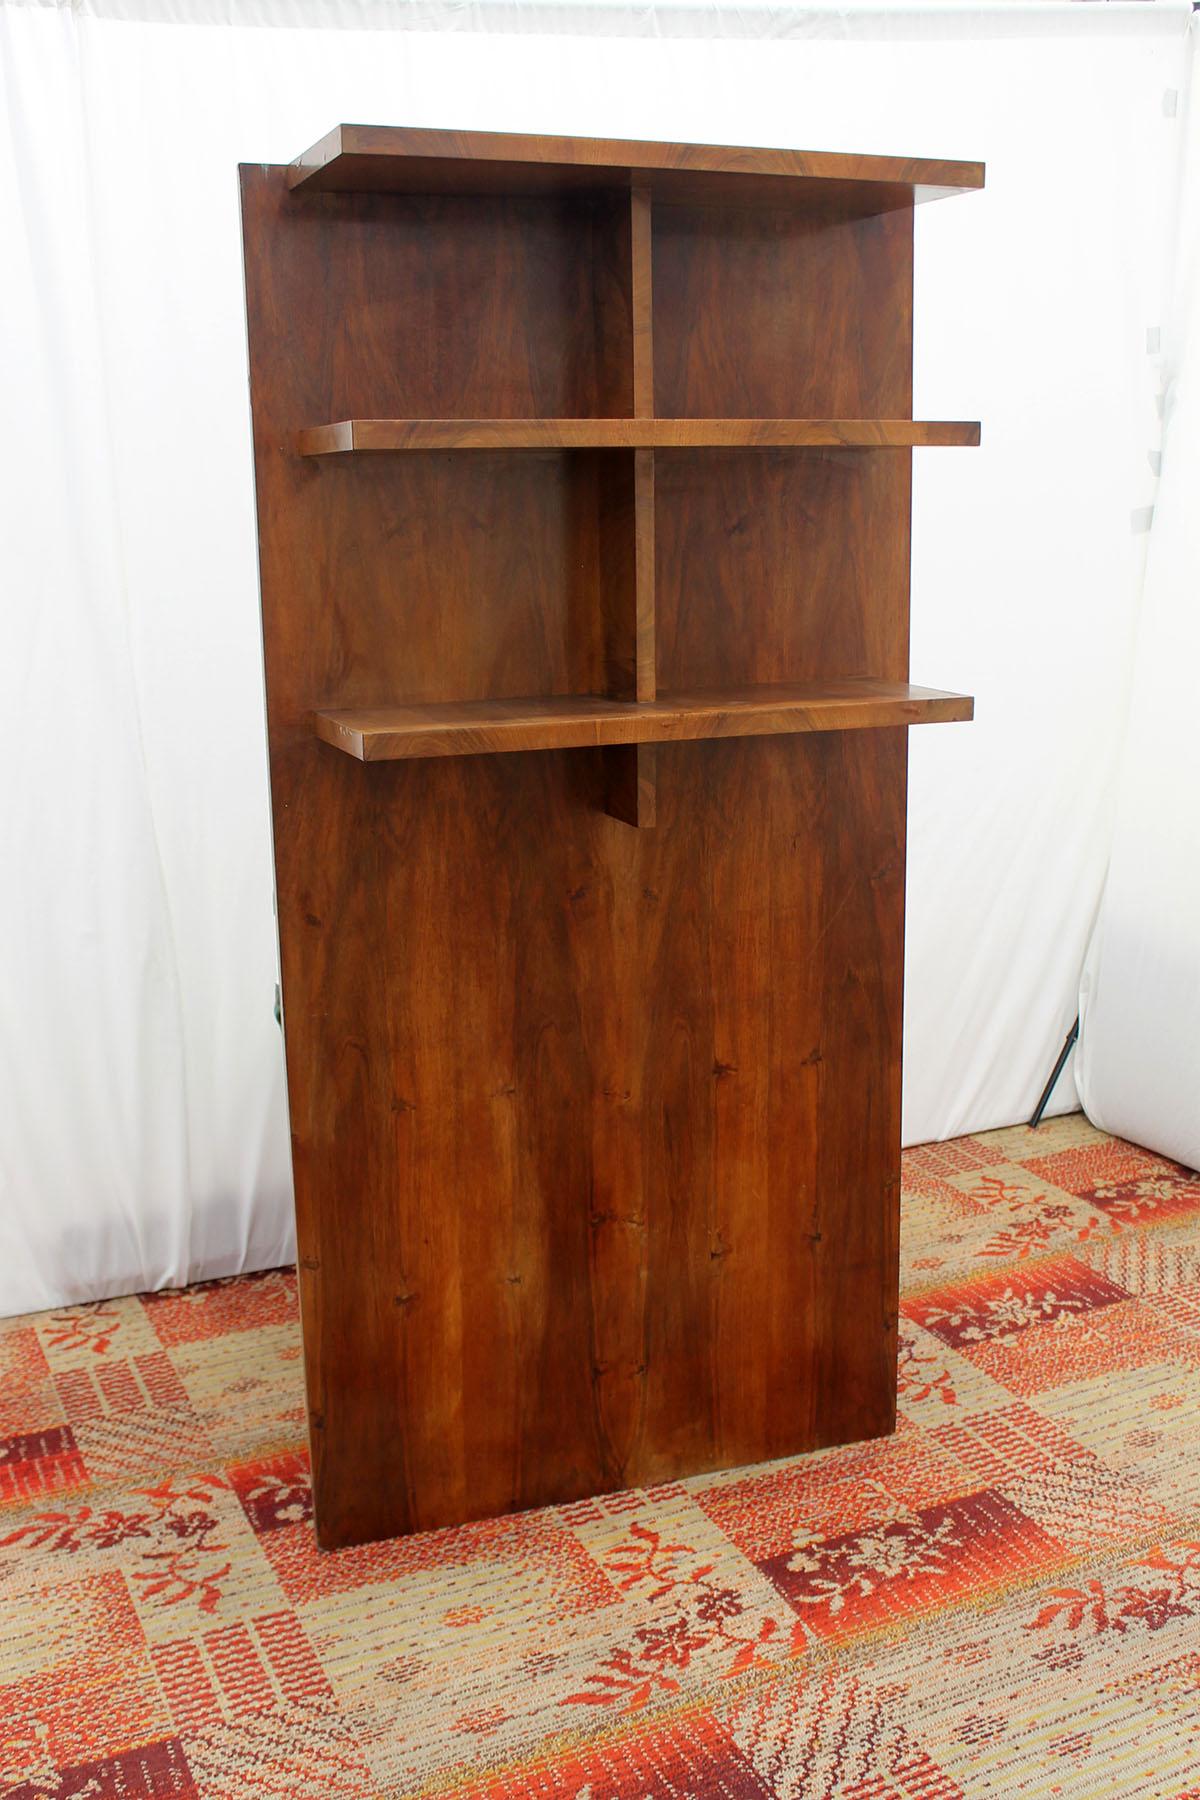 This Wall shelf or bookcase was made in the former Czechoslovakia in the 1930s, 
It´s made of walnut, you hang it on the wall using two screws.
dimensions of shelves is 70x23x3cm, between 1st and 2nd shelf is 27 cm, between 2nd and 3rd shelf is